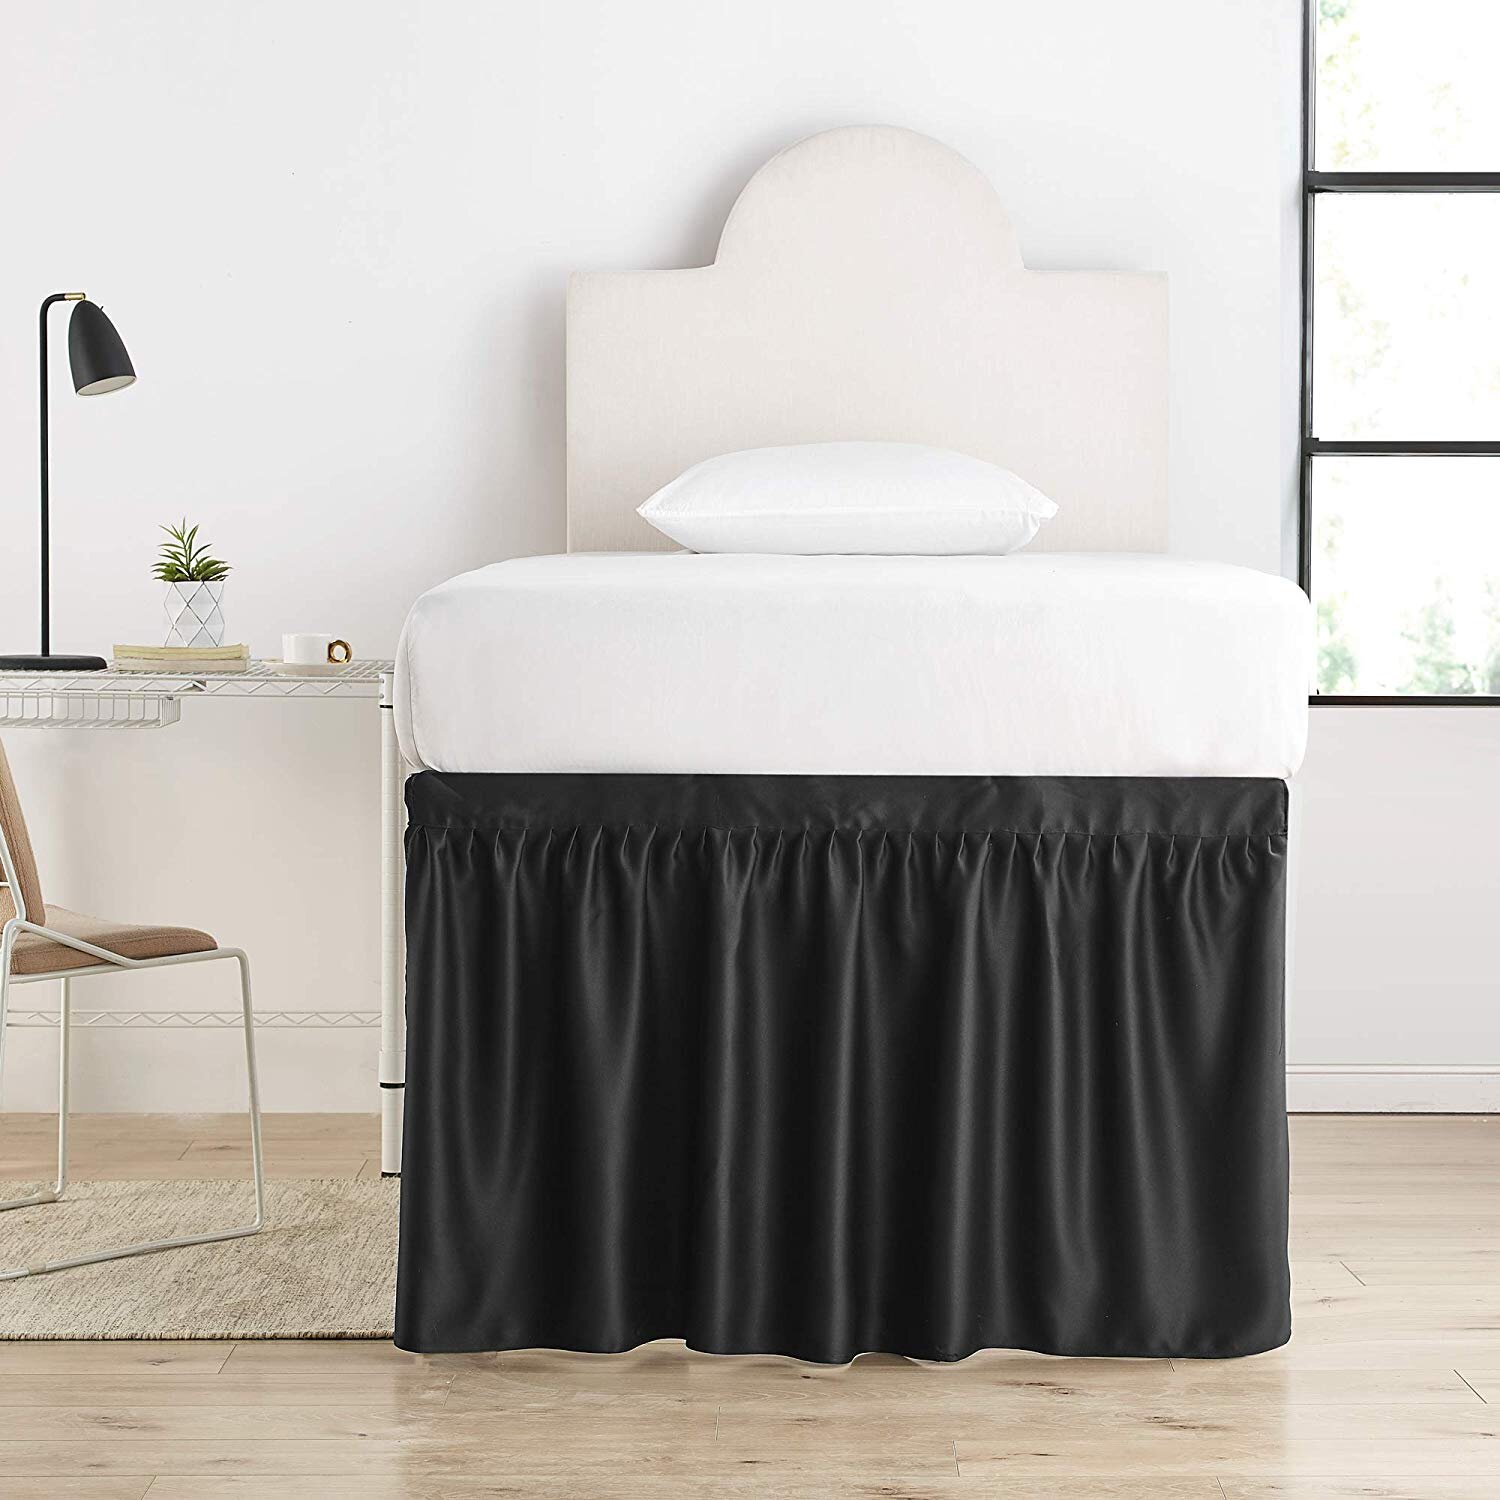 College Dorm Bed Skirts You Ll Love In 2021 Wayfair